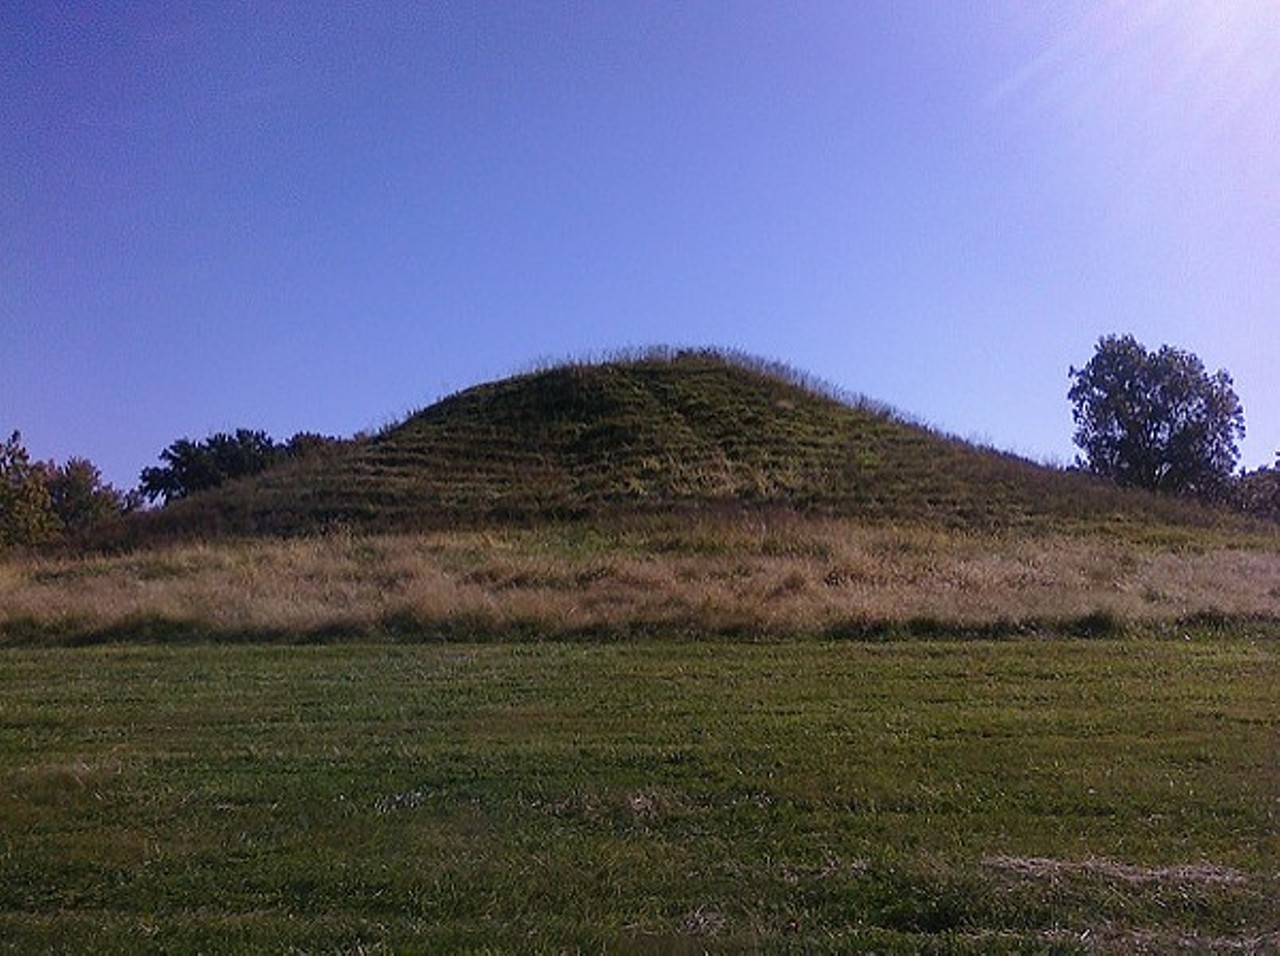 Cahokia Mounds Museum Society
The society works to preserve the "most sophisticated prehistoric native civilization north of Mexico" located in Collinsville, IL.
Find out more here.
Donate here.
Photo credit: Aaron Plewke / Flickr